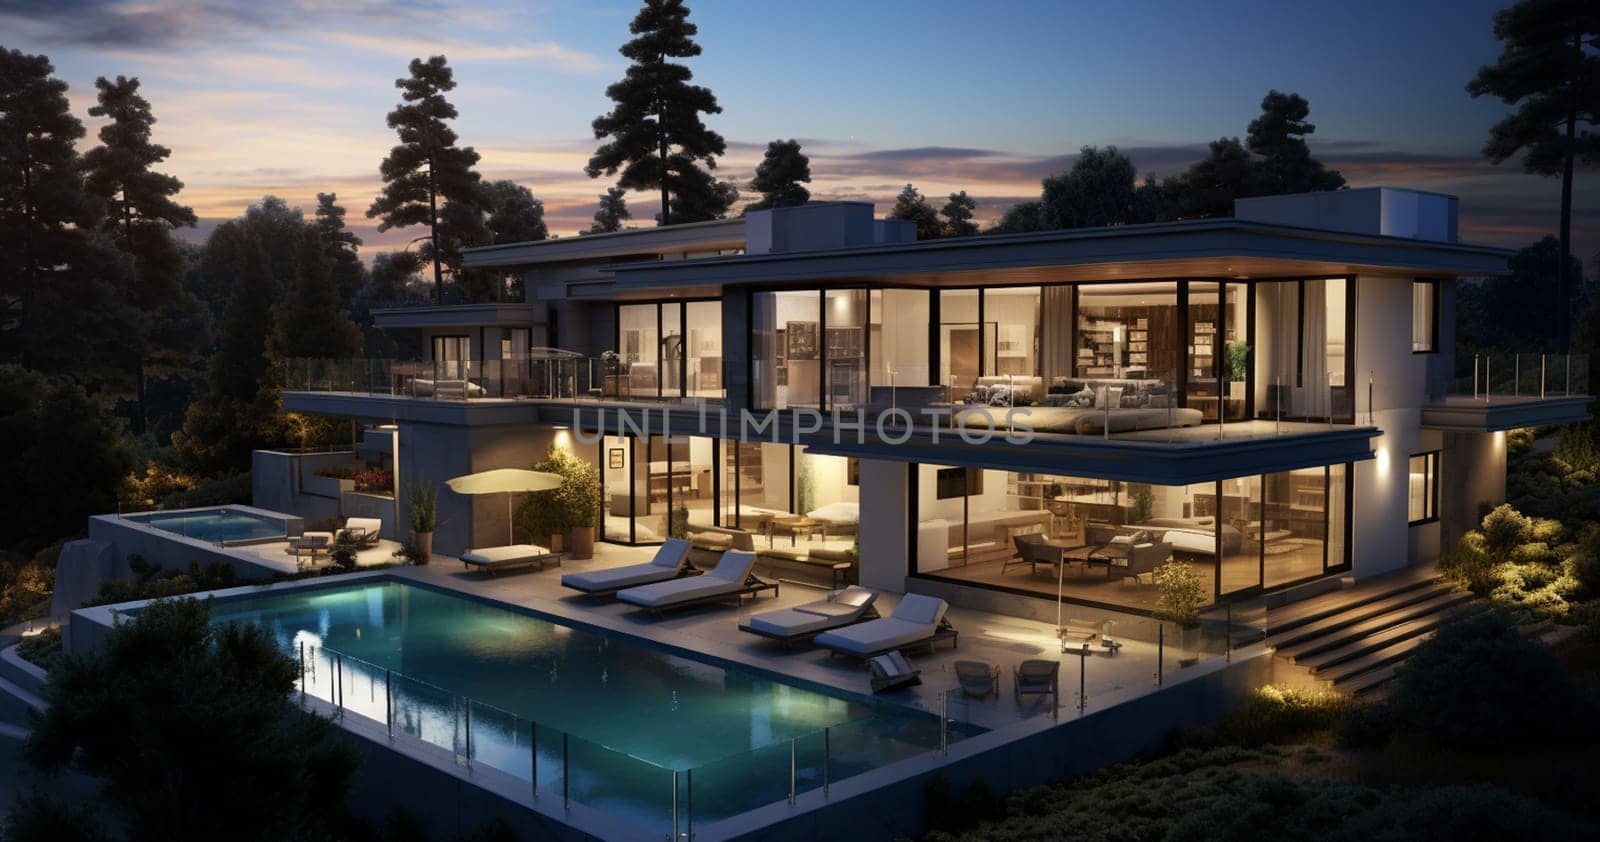 Modern house exterior design at night with swimming pool 3D Rendering, 3D Illustration. High quality photo